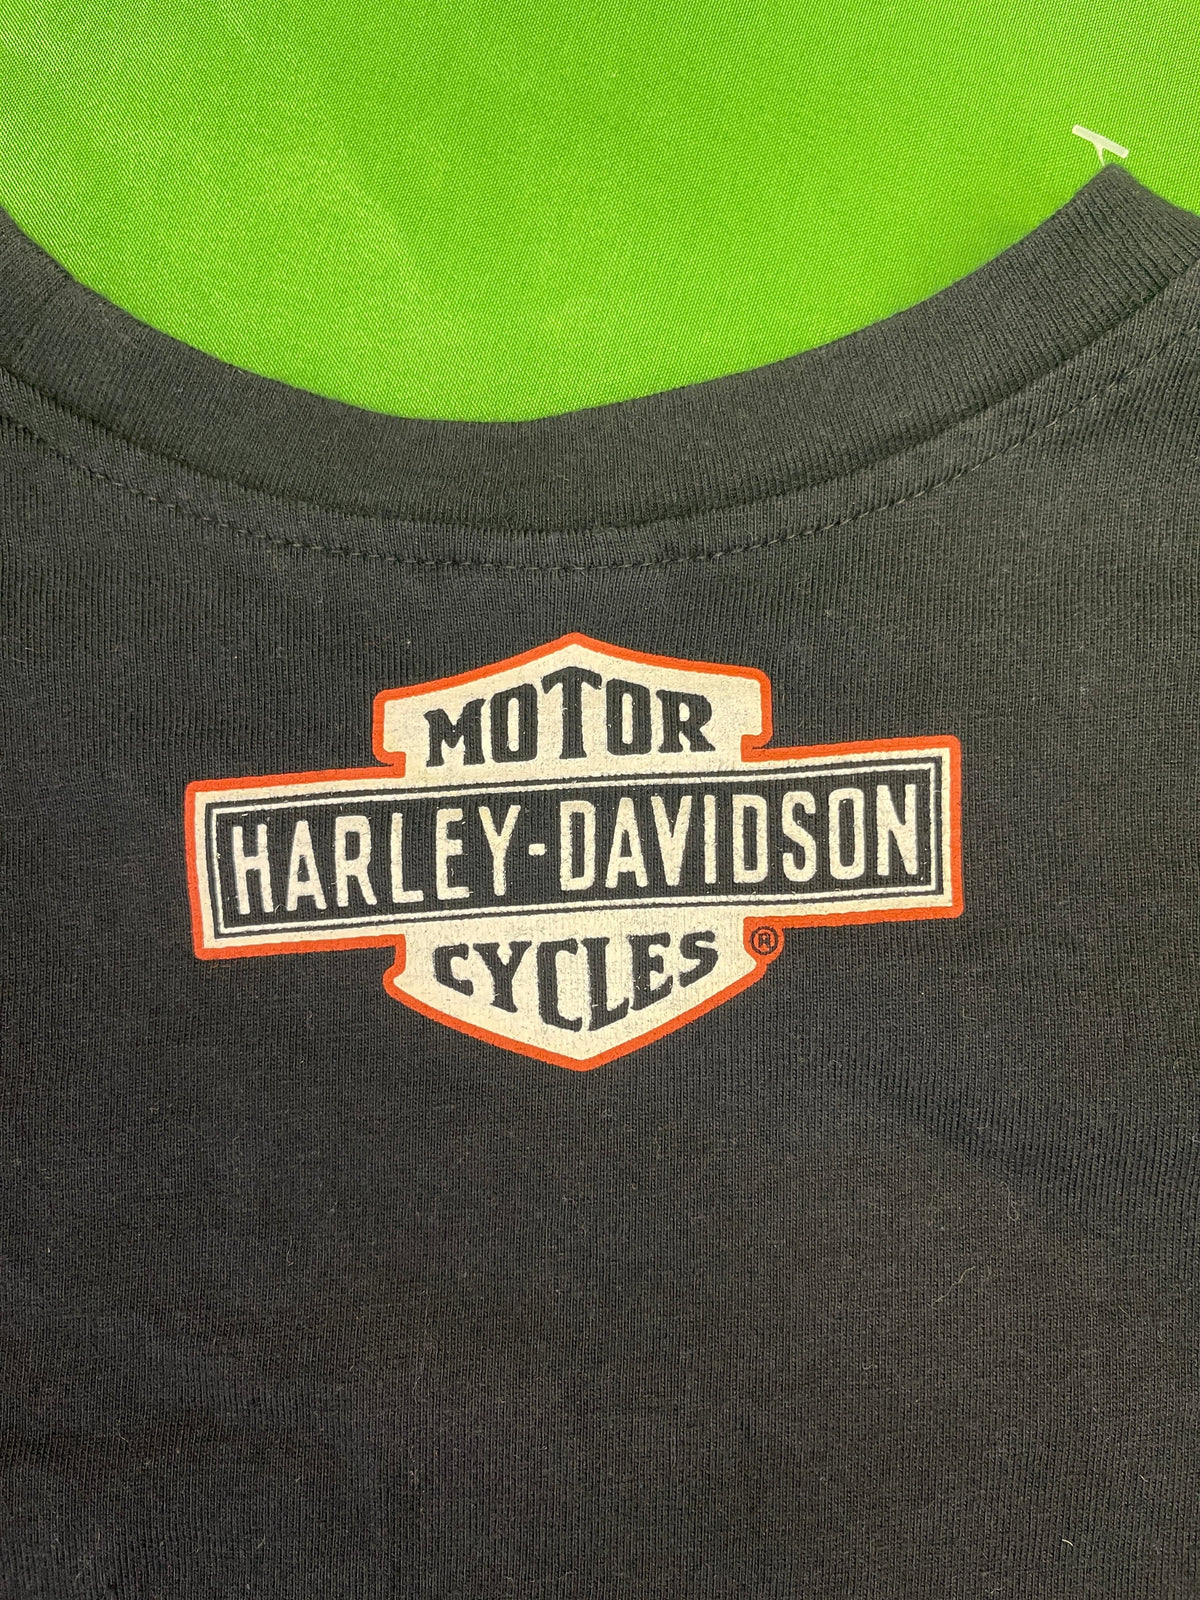 Harley Davidson Black Stitched L/S T-Shirt Youth Small